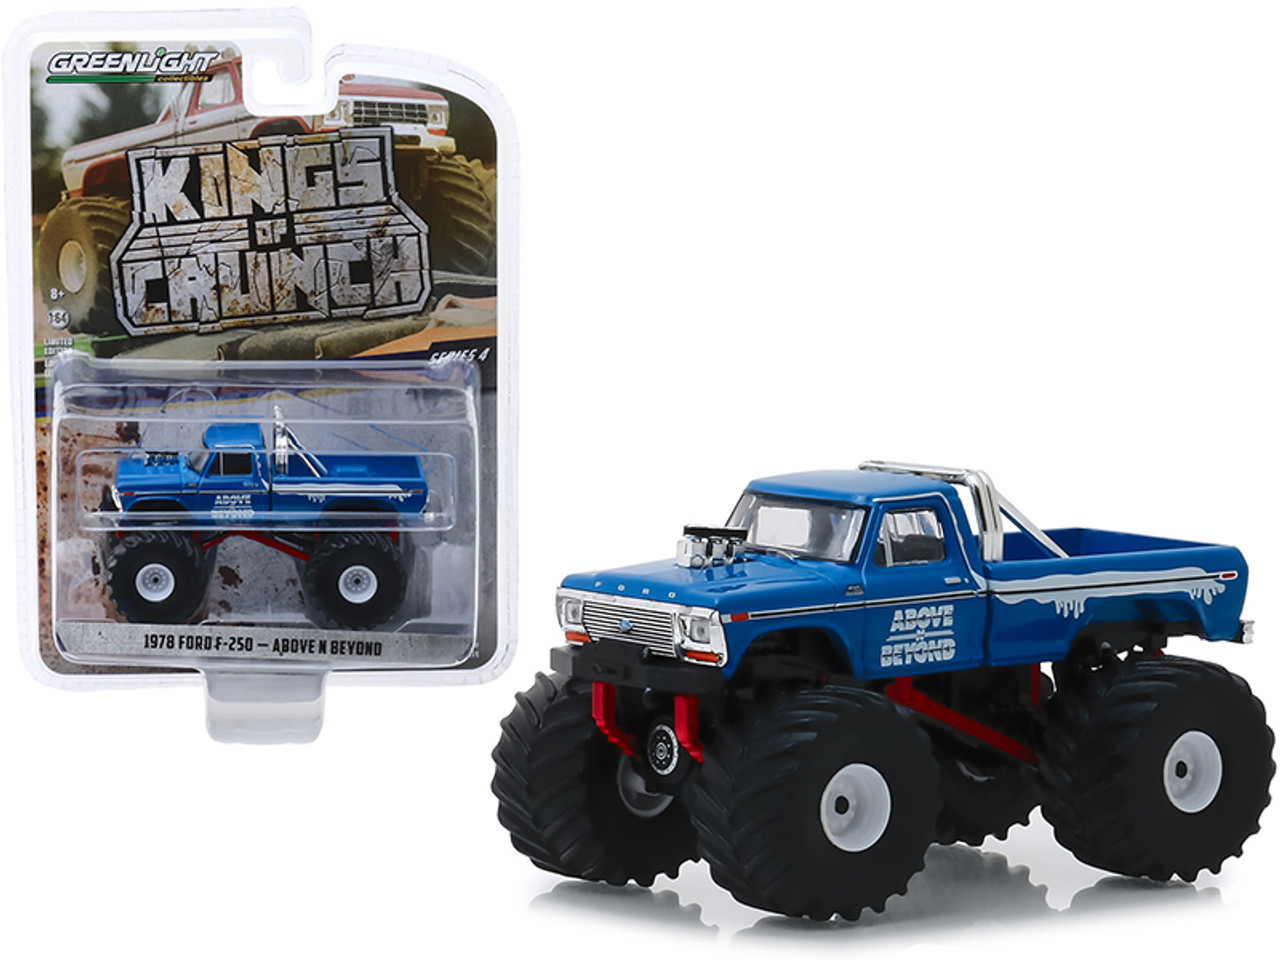 1/64 Greenlight 1978 Ford F-250 Monster Truck "Above N Beyond" Blue "Kings of Crunch" Series 4 Diecast Car Model